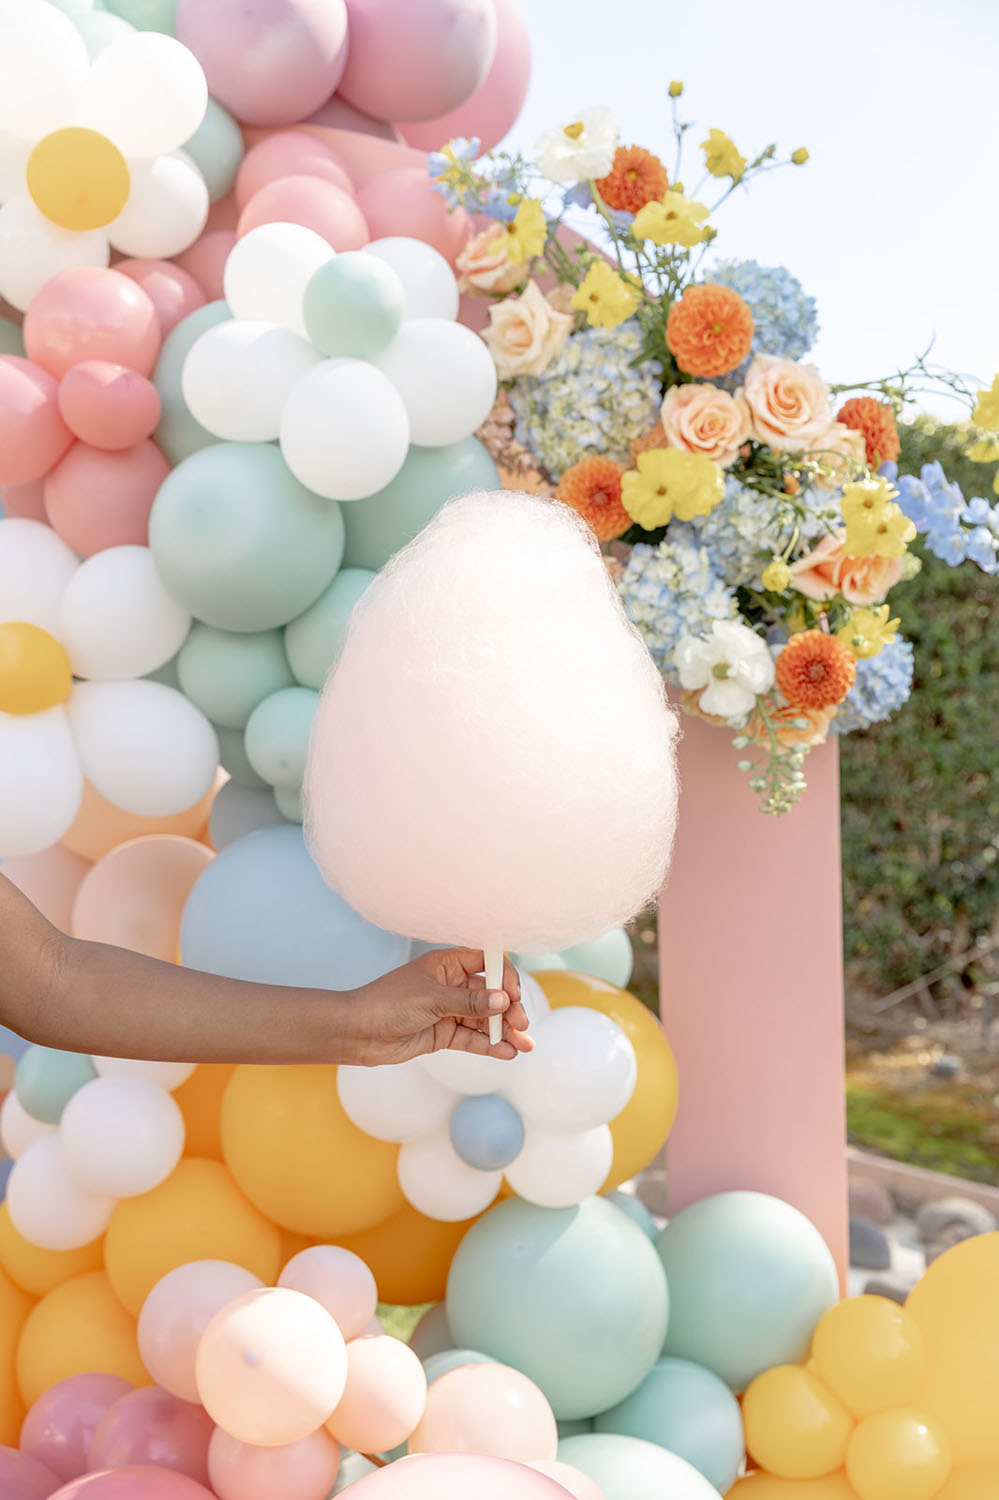 cotton candy and daisy balloon ach